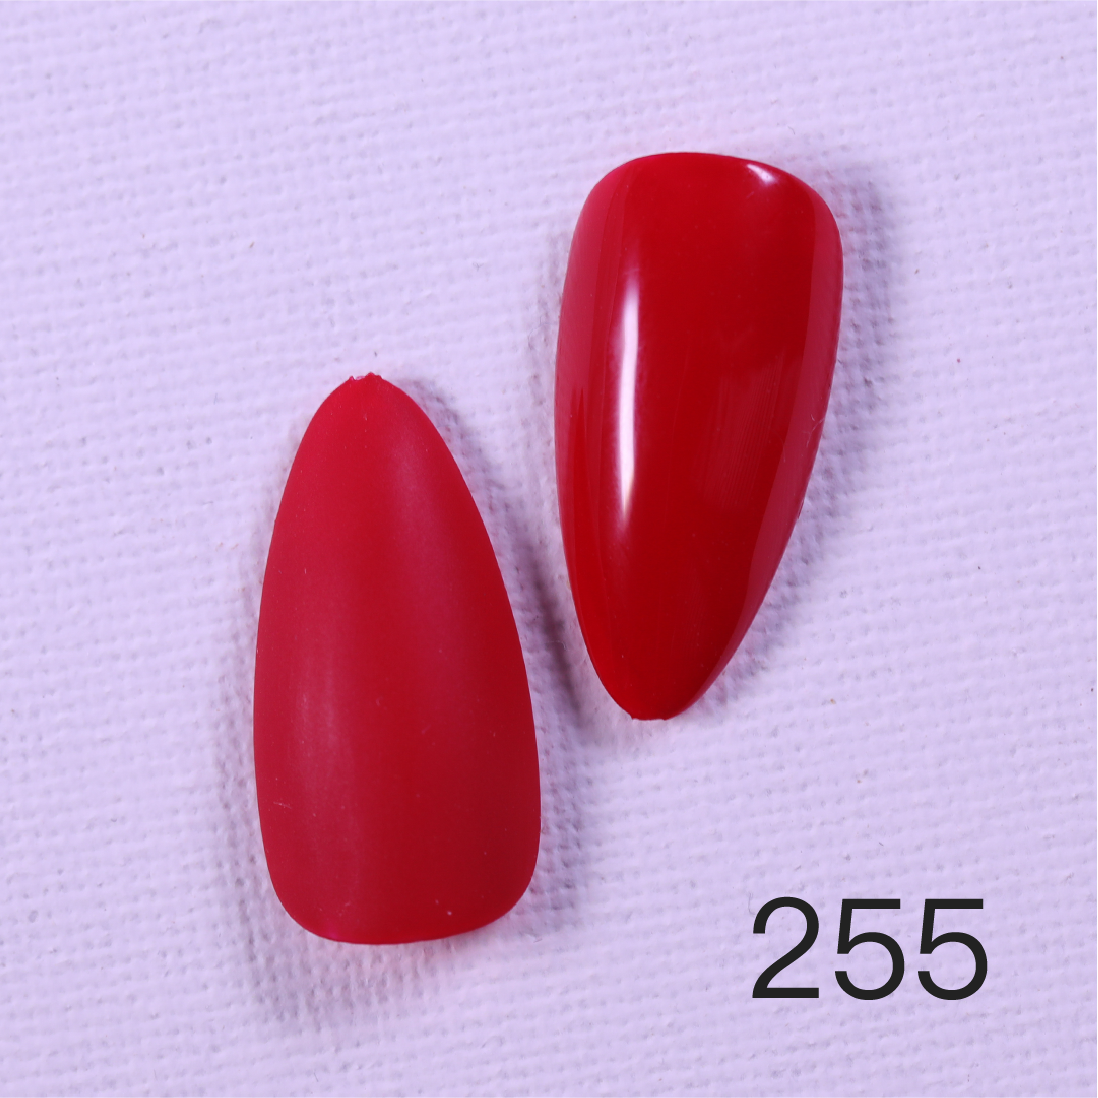 {{ GelPolish_USA }} GelPolish USA 255 GelPolish USA Mela Mela Gel Polish Colour - 80 colors available to choose from - {{ UV_Drying_machine}} - {{ Powerful_LED_Nail_Dryer}} {{ Gelish }} {{Gel_nail_polish}} {{ Gel_polish }}